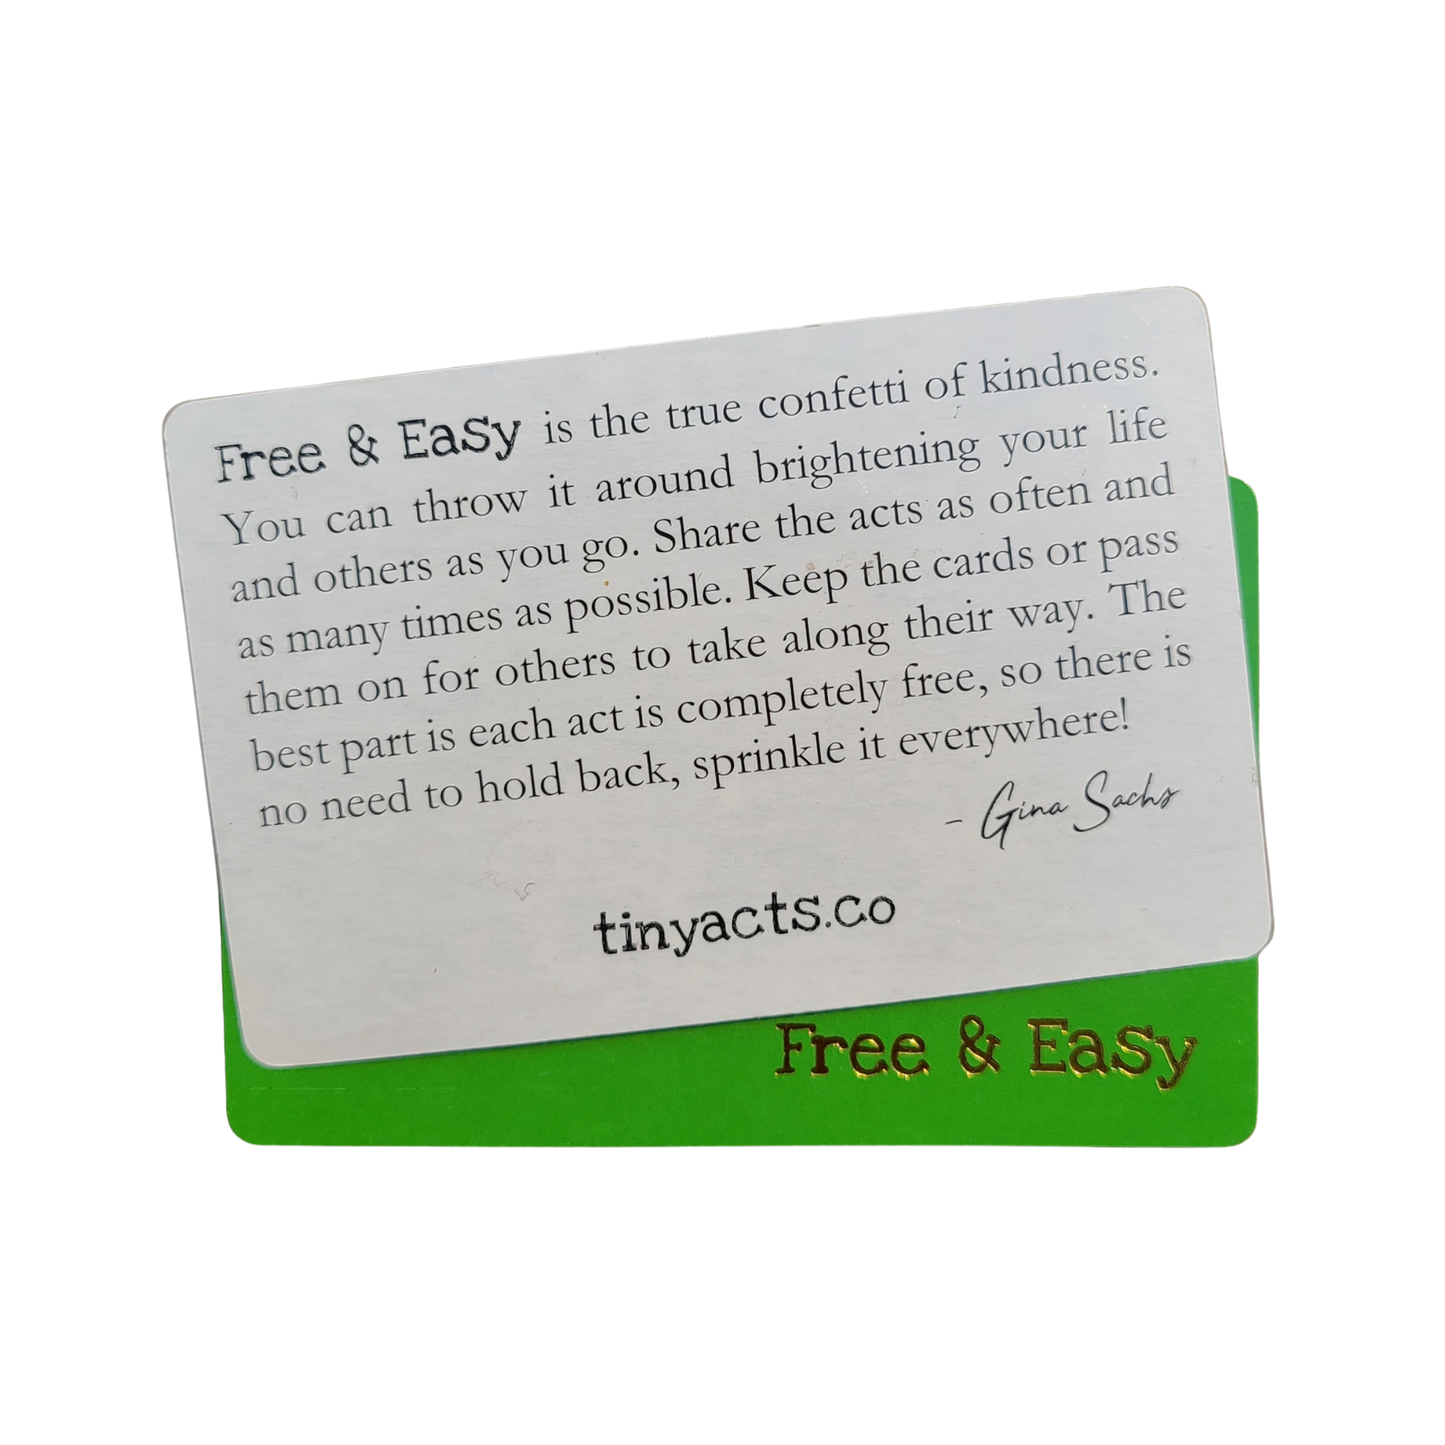 tinyacts.co, Tiny Acts of Kindness, Kindness Cards, Free & Easy